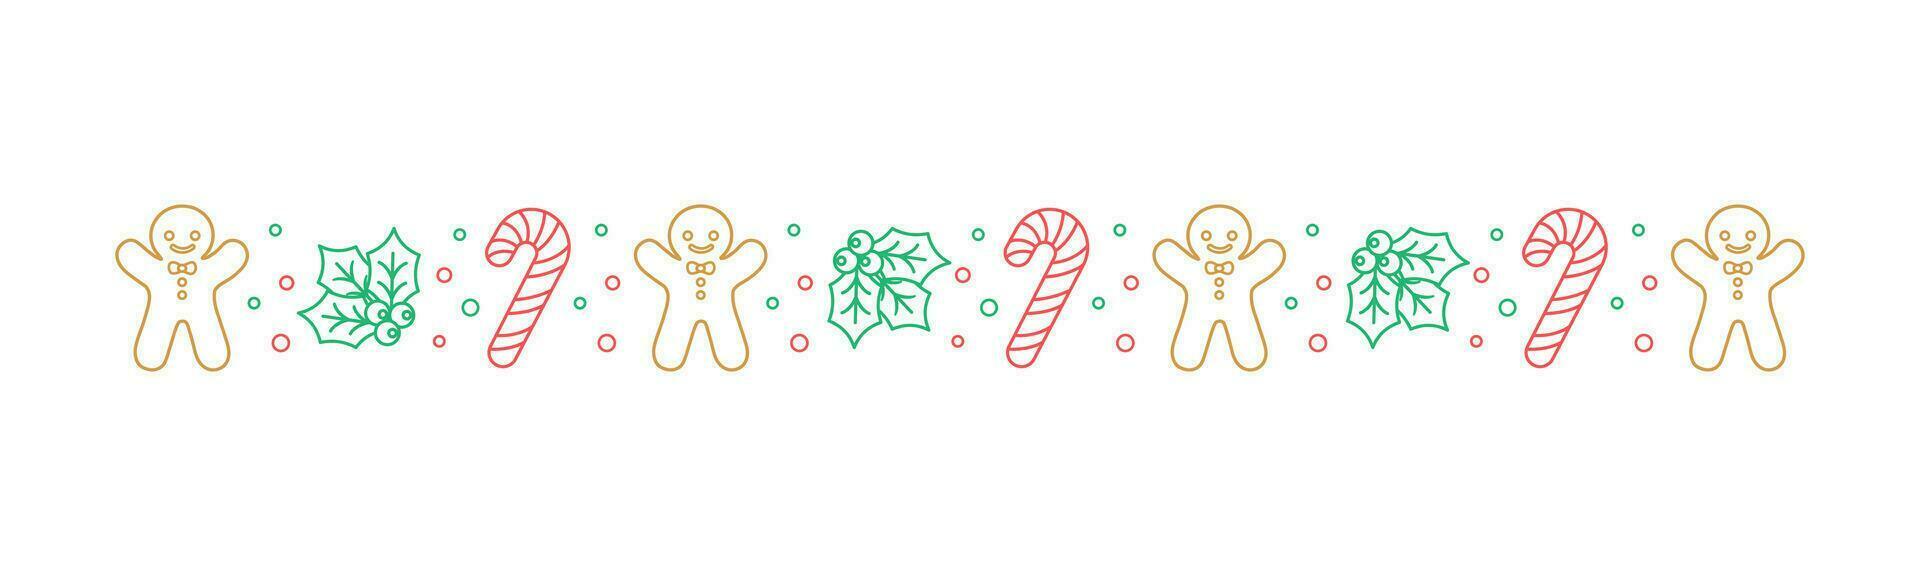 Christmas themed decorative border and text divider, Gingerbread Cookies and Candy Cane Pattern Outline Doodle. Vector Illustration.